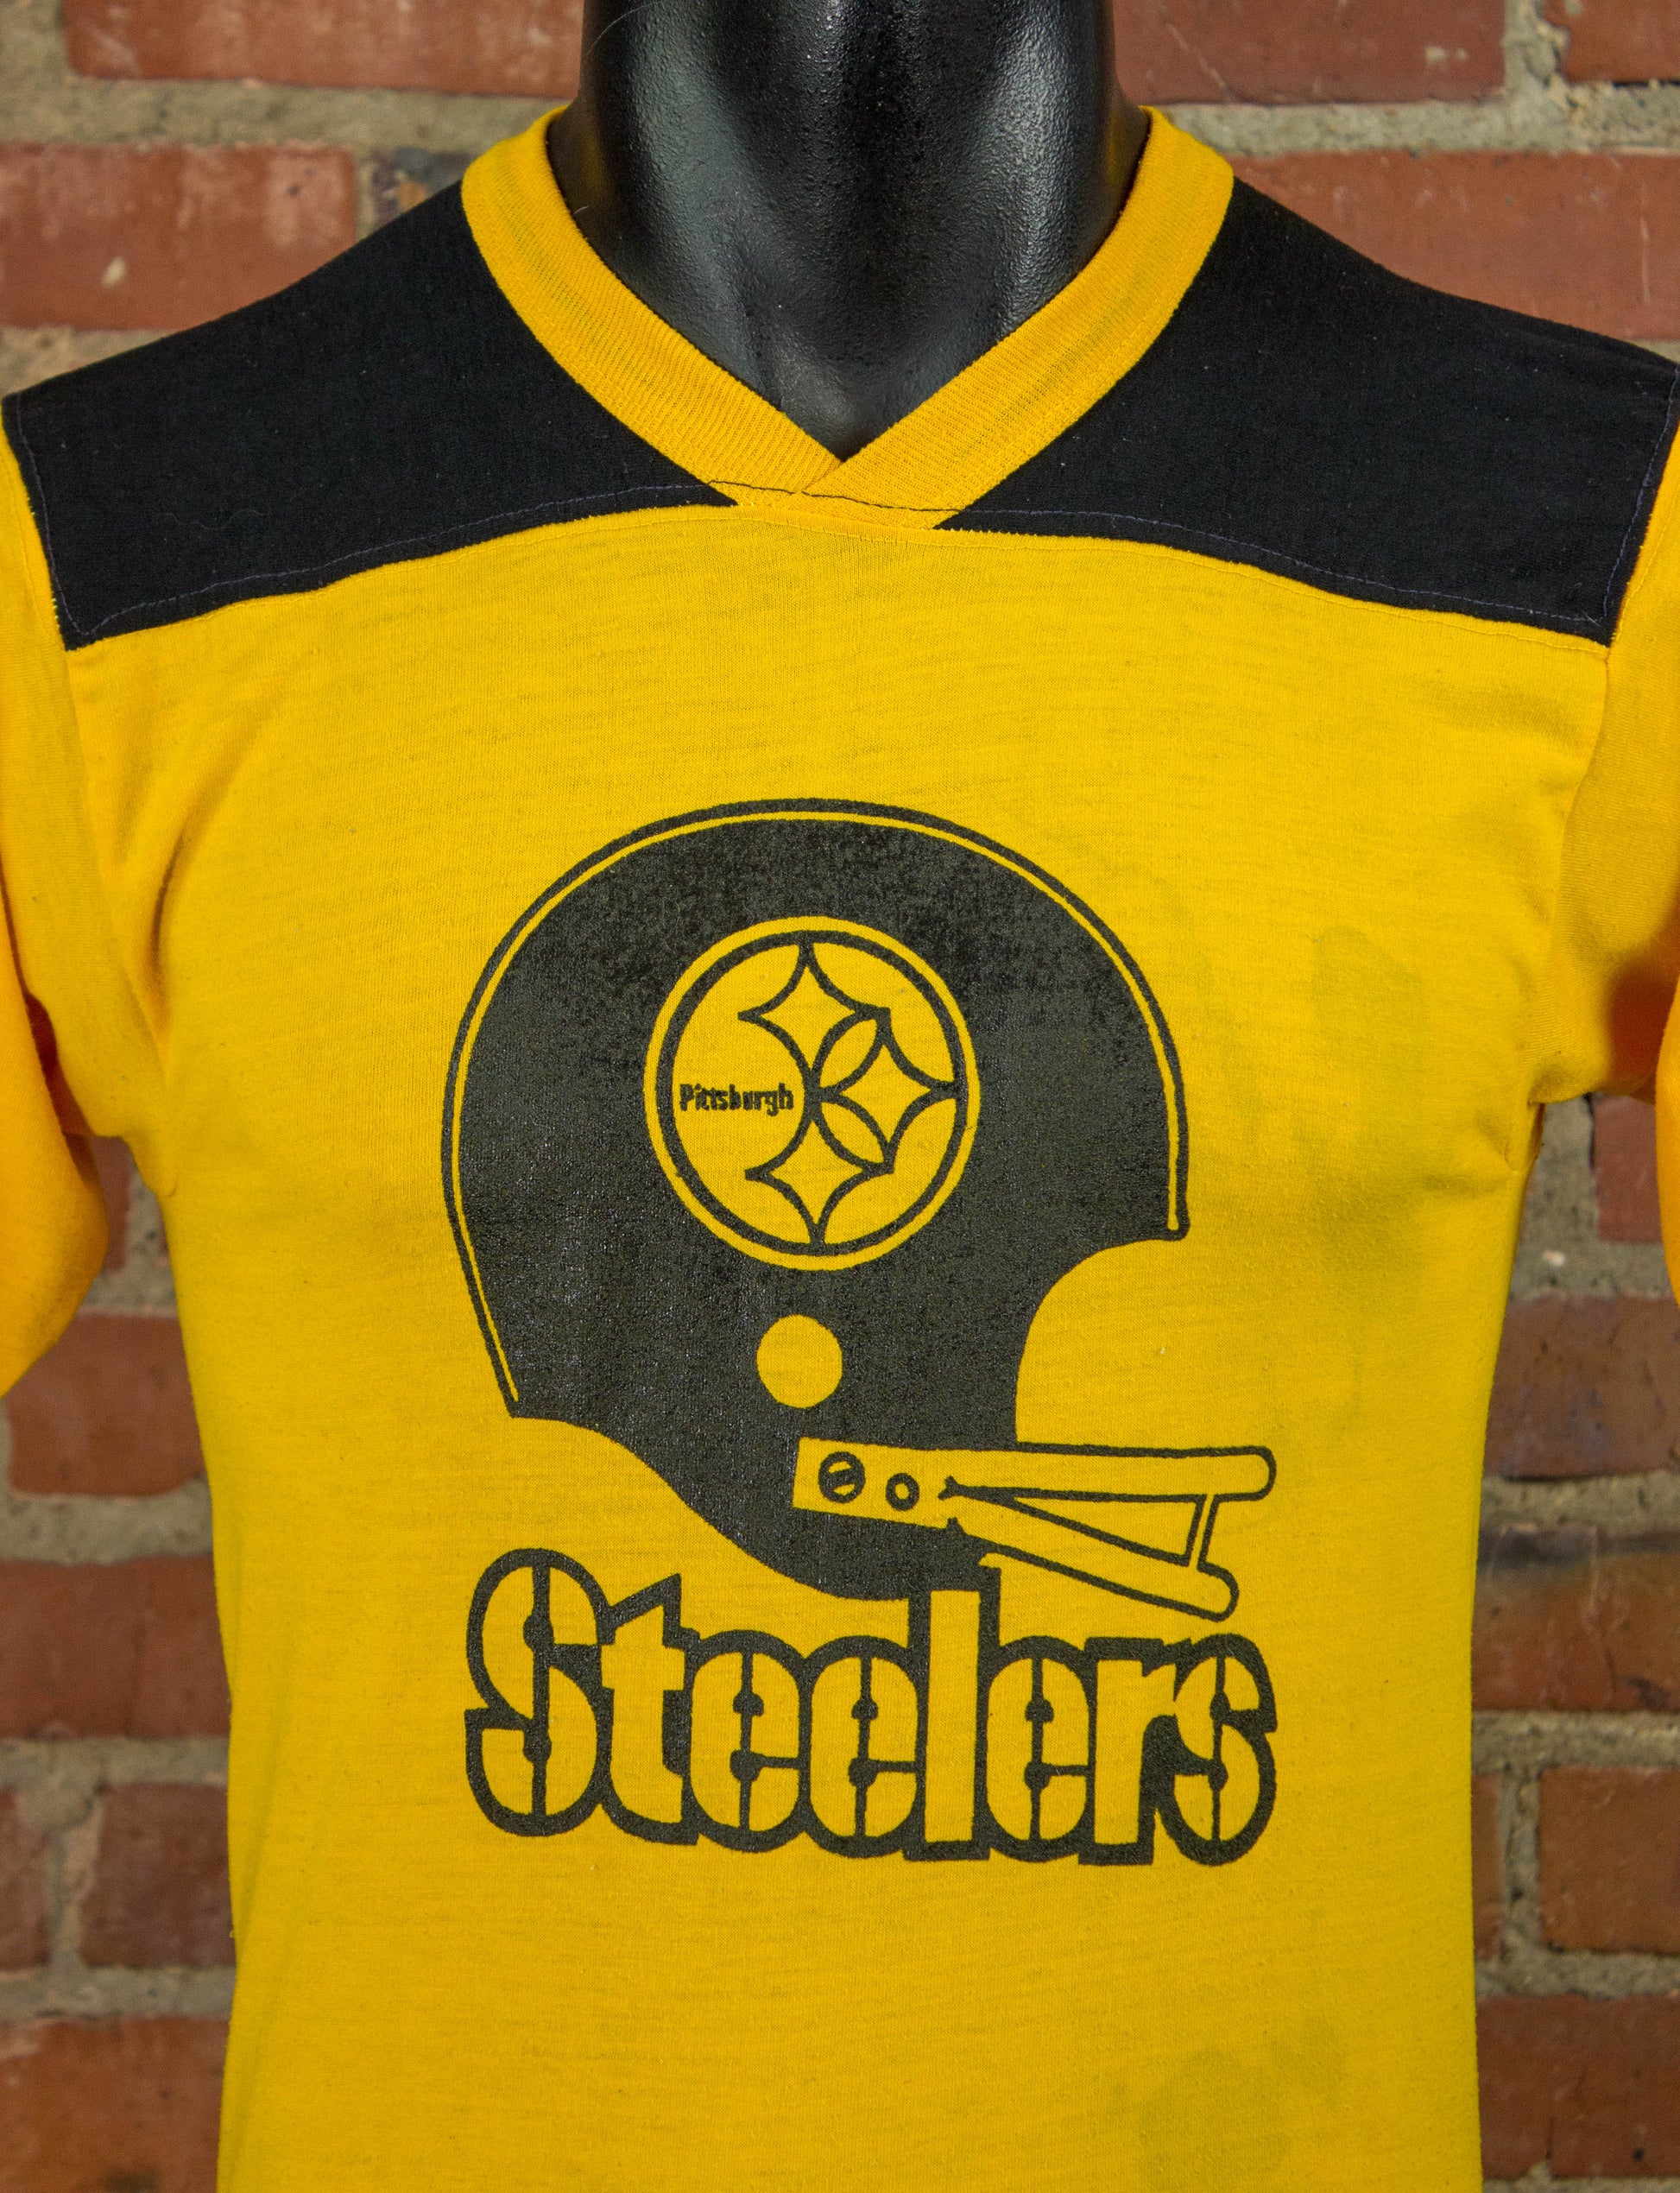 Vintage 70s Pittsburgh Steelers Black and Yellow Football Jersey Style Graphic T Shirt Unisex Small